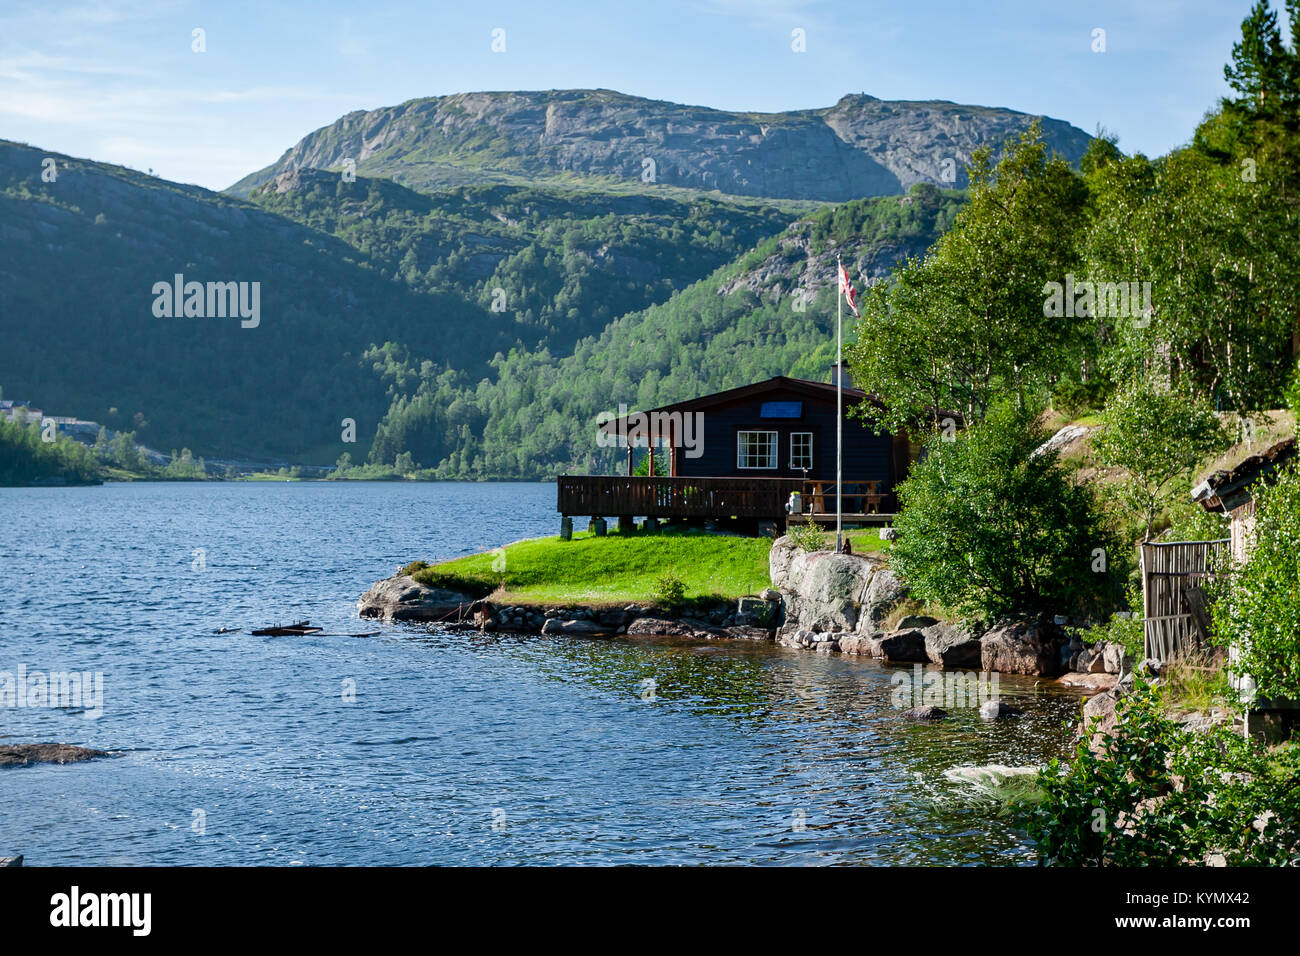 Norwegian wooden house build by the fjord with the scenic mountain view in the background. Norwegian flag. Blue sky. Idyllic location Stock Photo